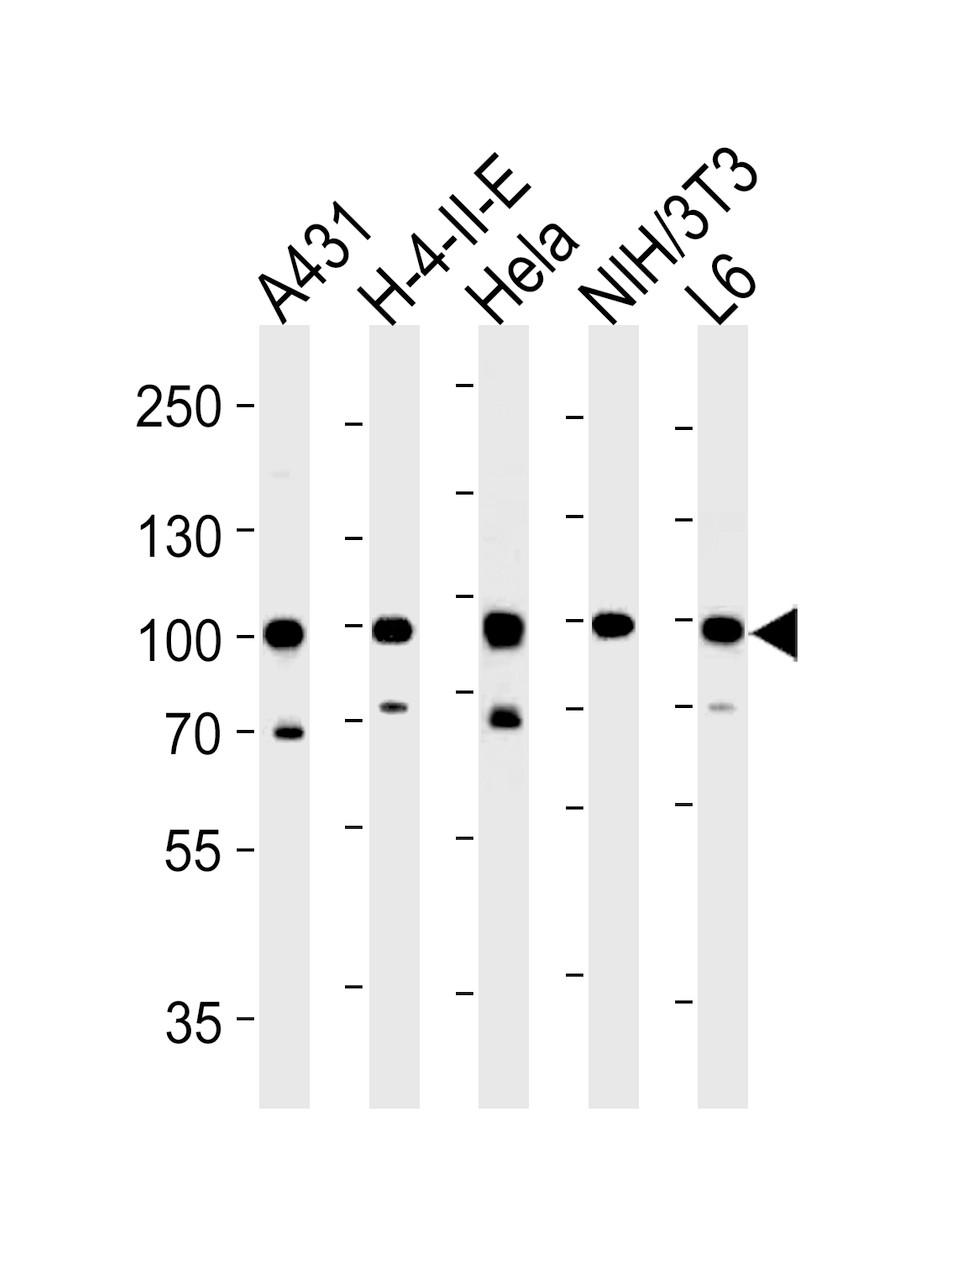 Western blot analysis in A431, H-4-II-E, Hela, mouse NIH/3T3, rat L6 cell line lysates (35ug/lane) .This demonstrates the HSP90AB1 antibody detected the HSP90AB1 protein (arrow) .